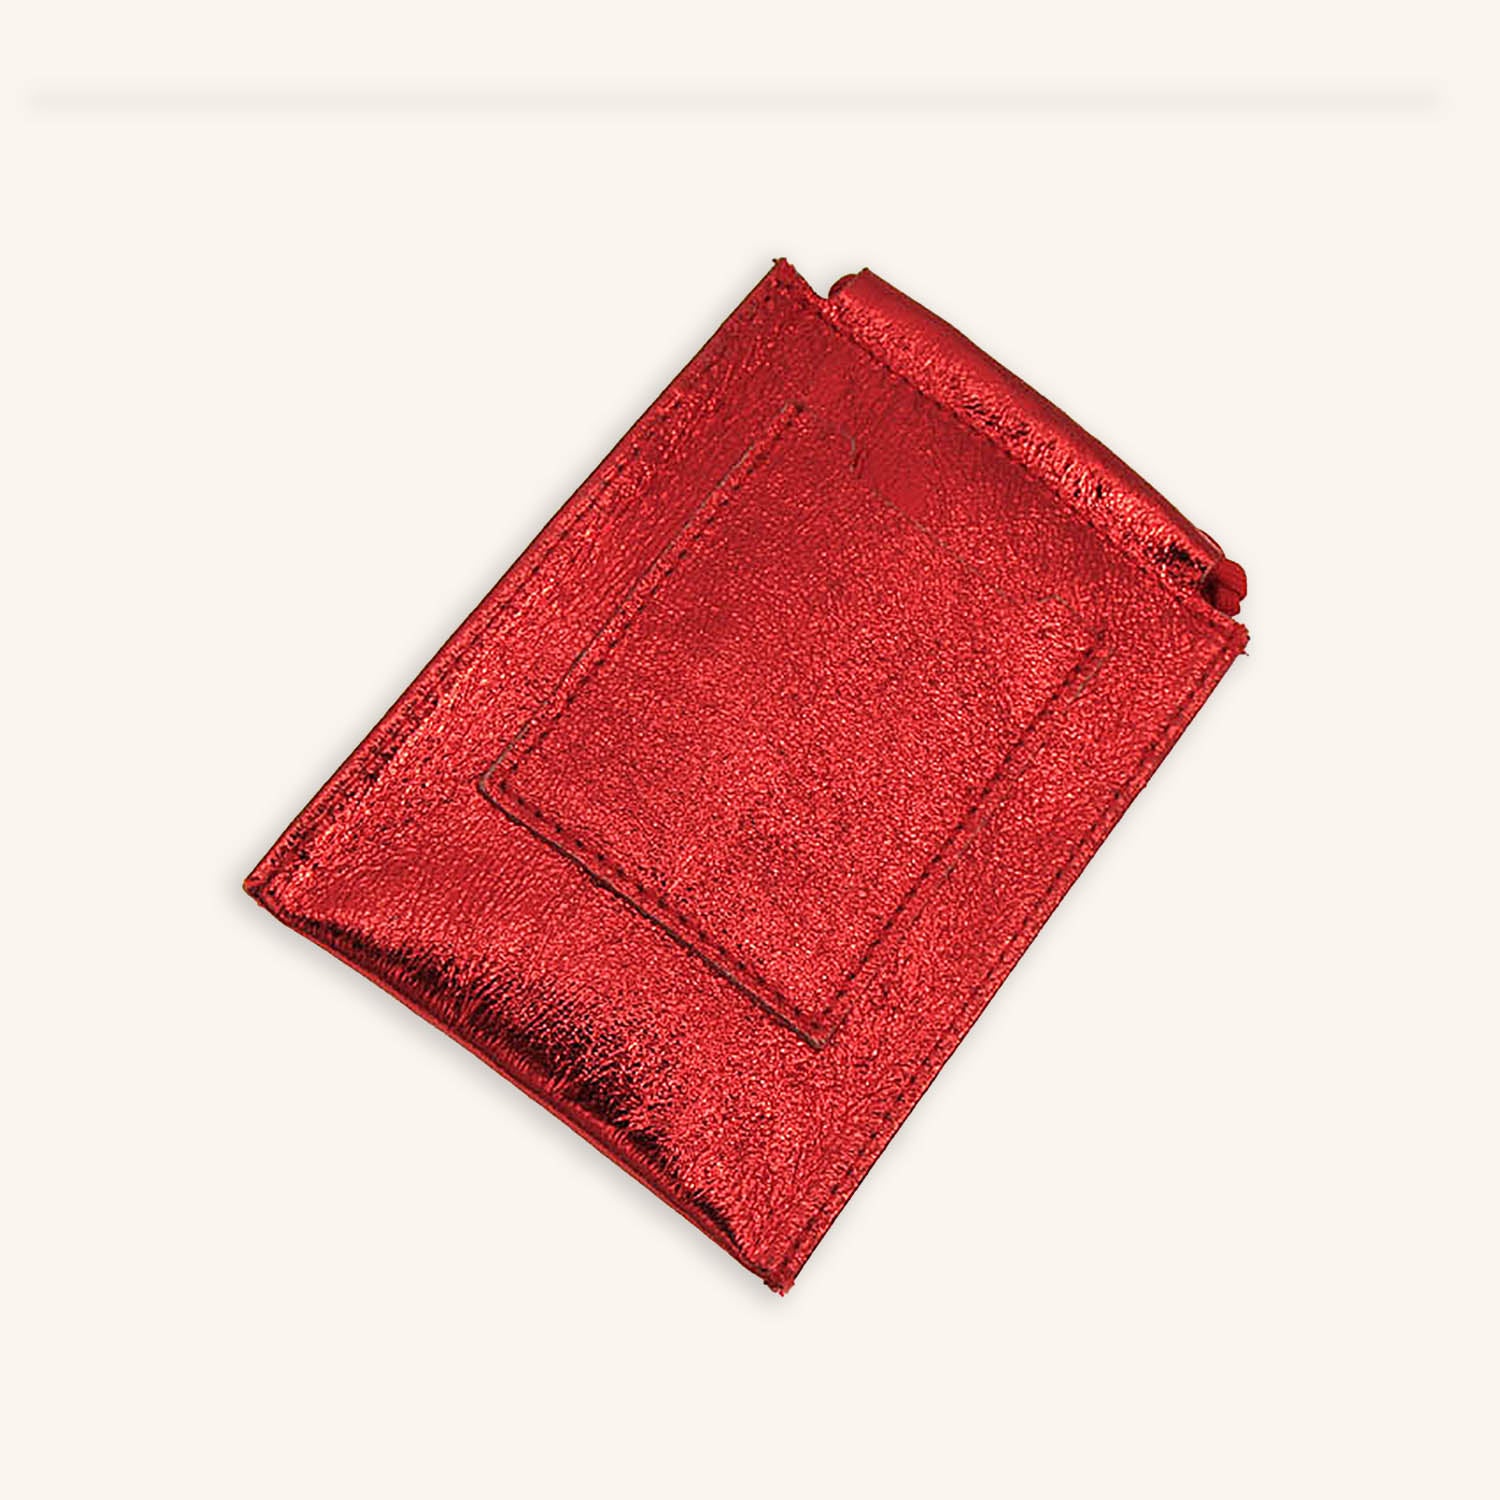 Metallic Leather Phone Pouch